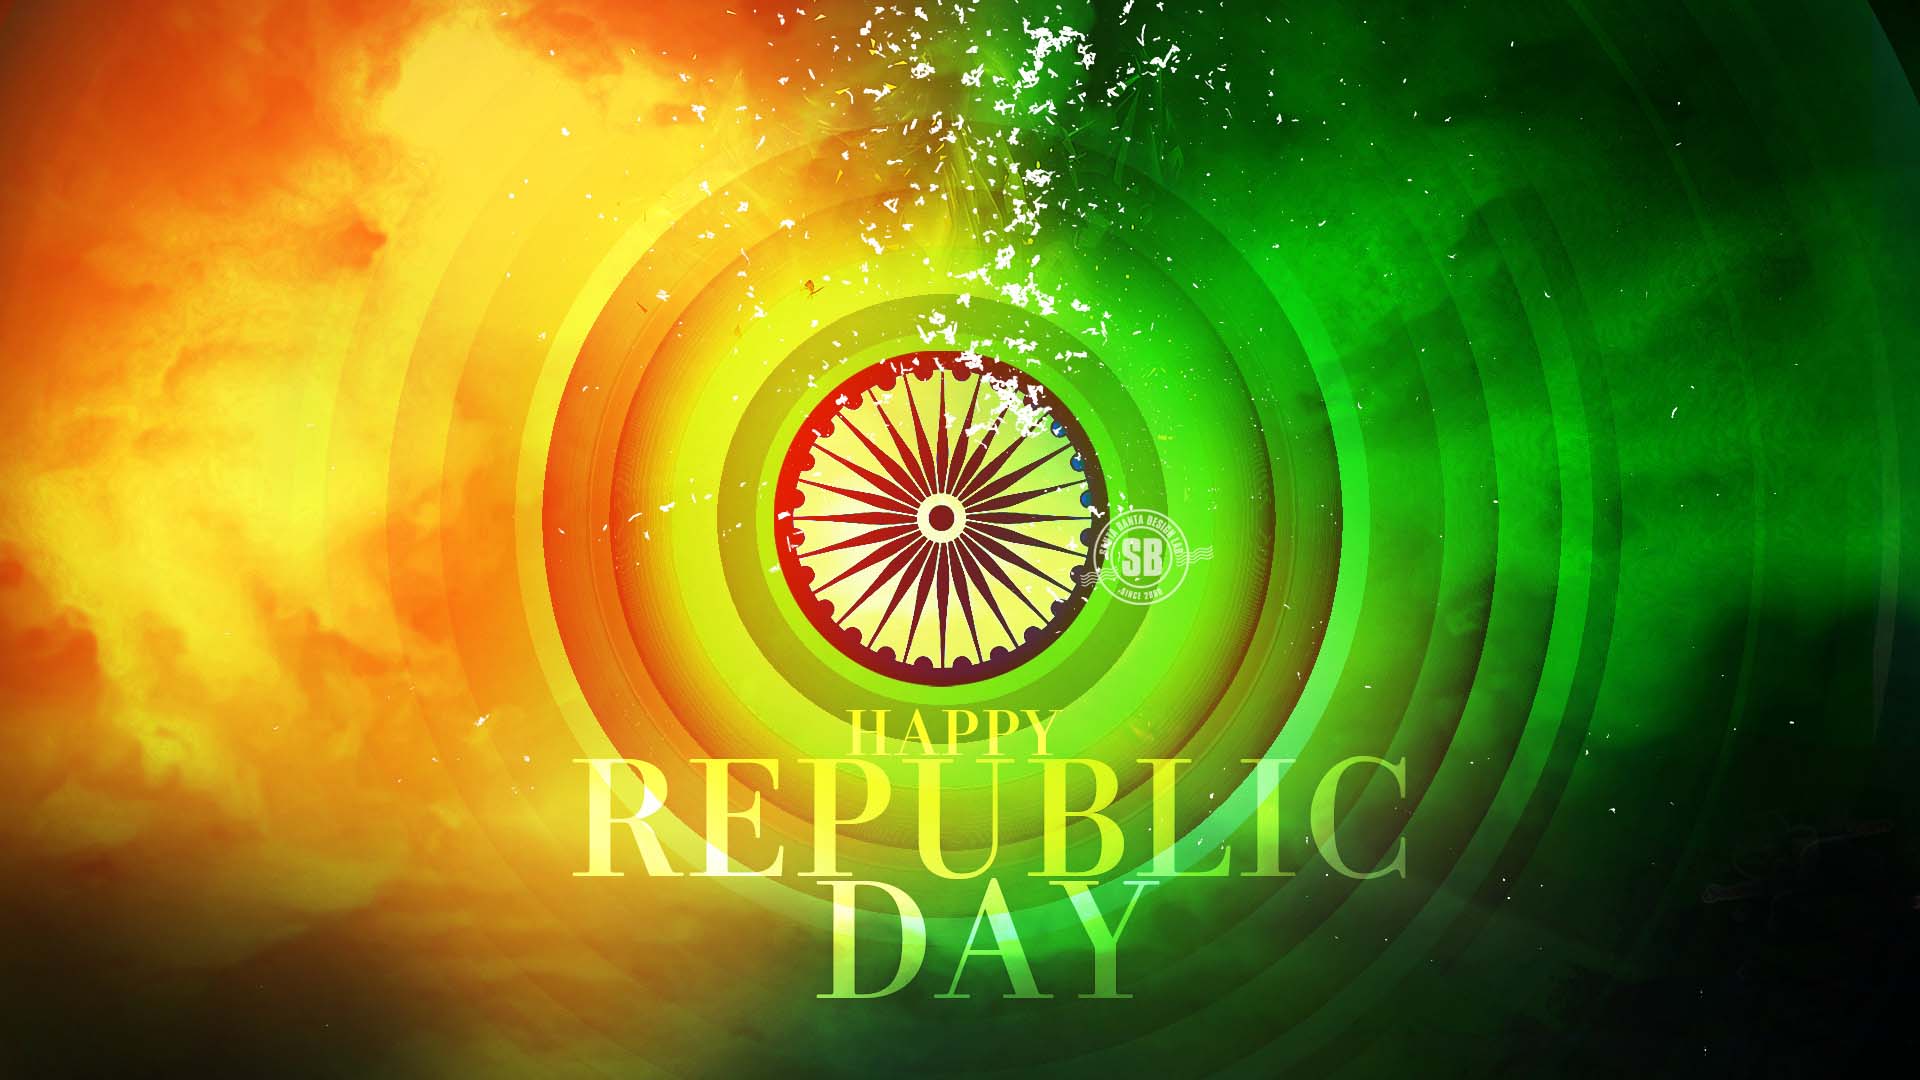 Free Happy Republic Day Image 2015 & HD pictures